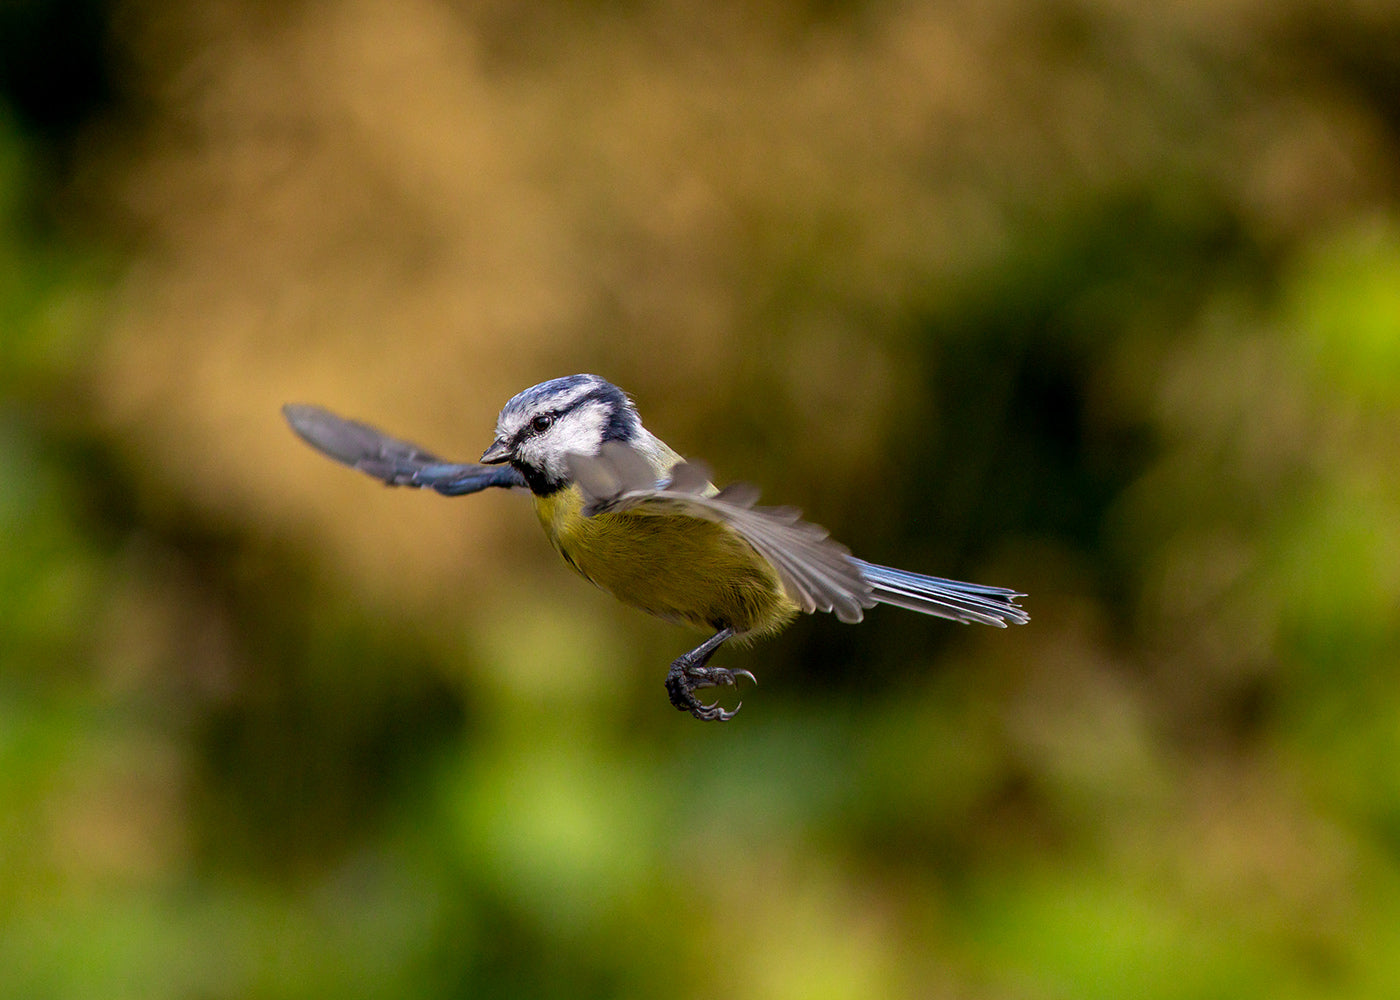 Garden wildlife photo of Blue Tit photographed mid-flight with smooth background